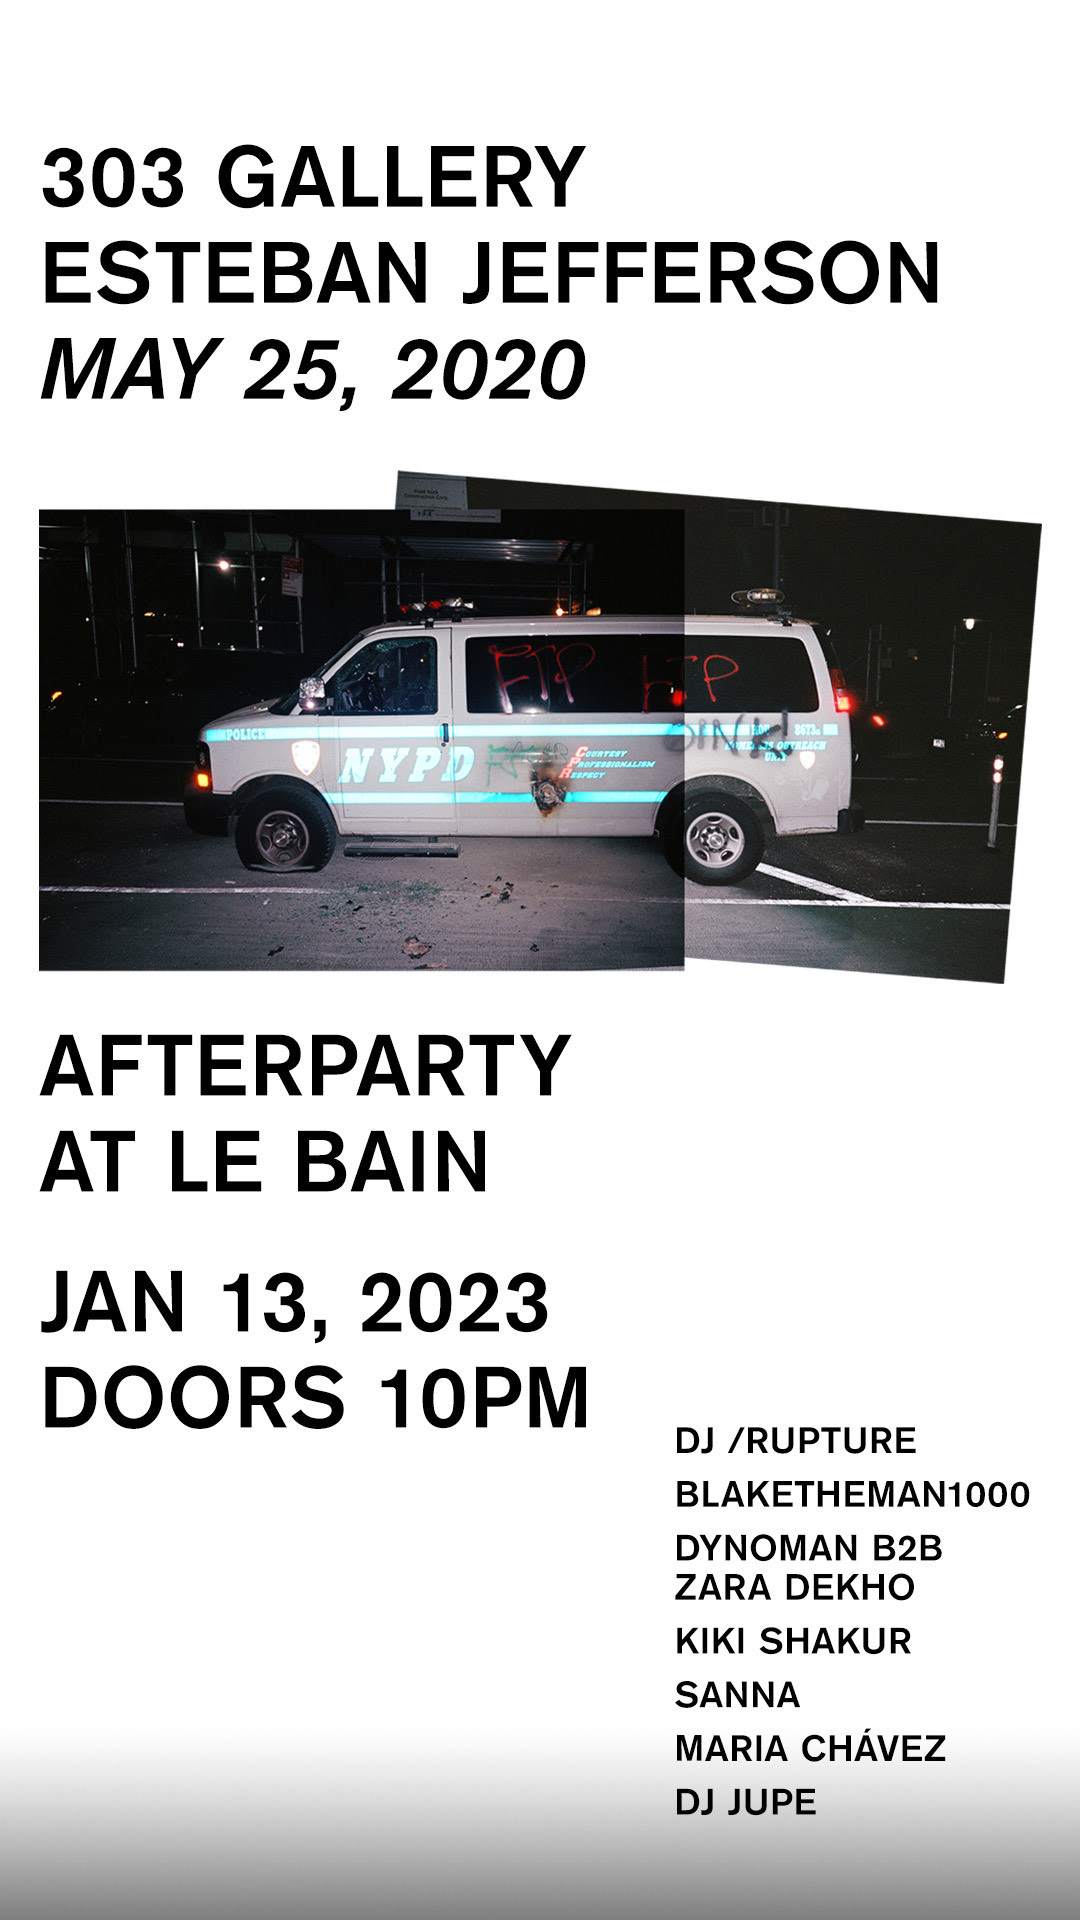 303 Gallery: Esteban Jefferson After Party - フライヤー表